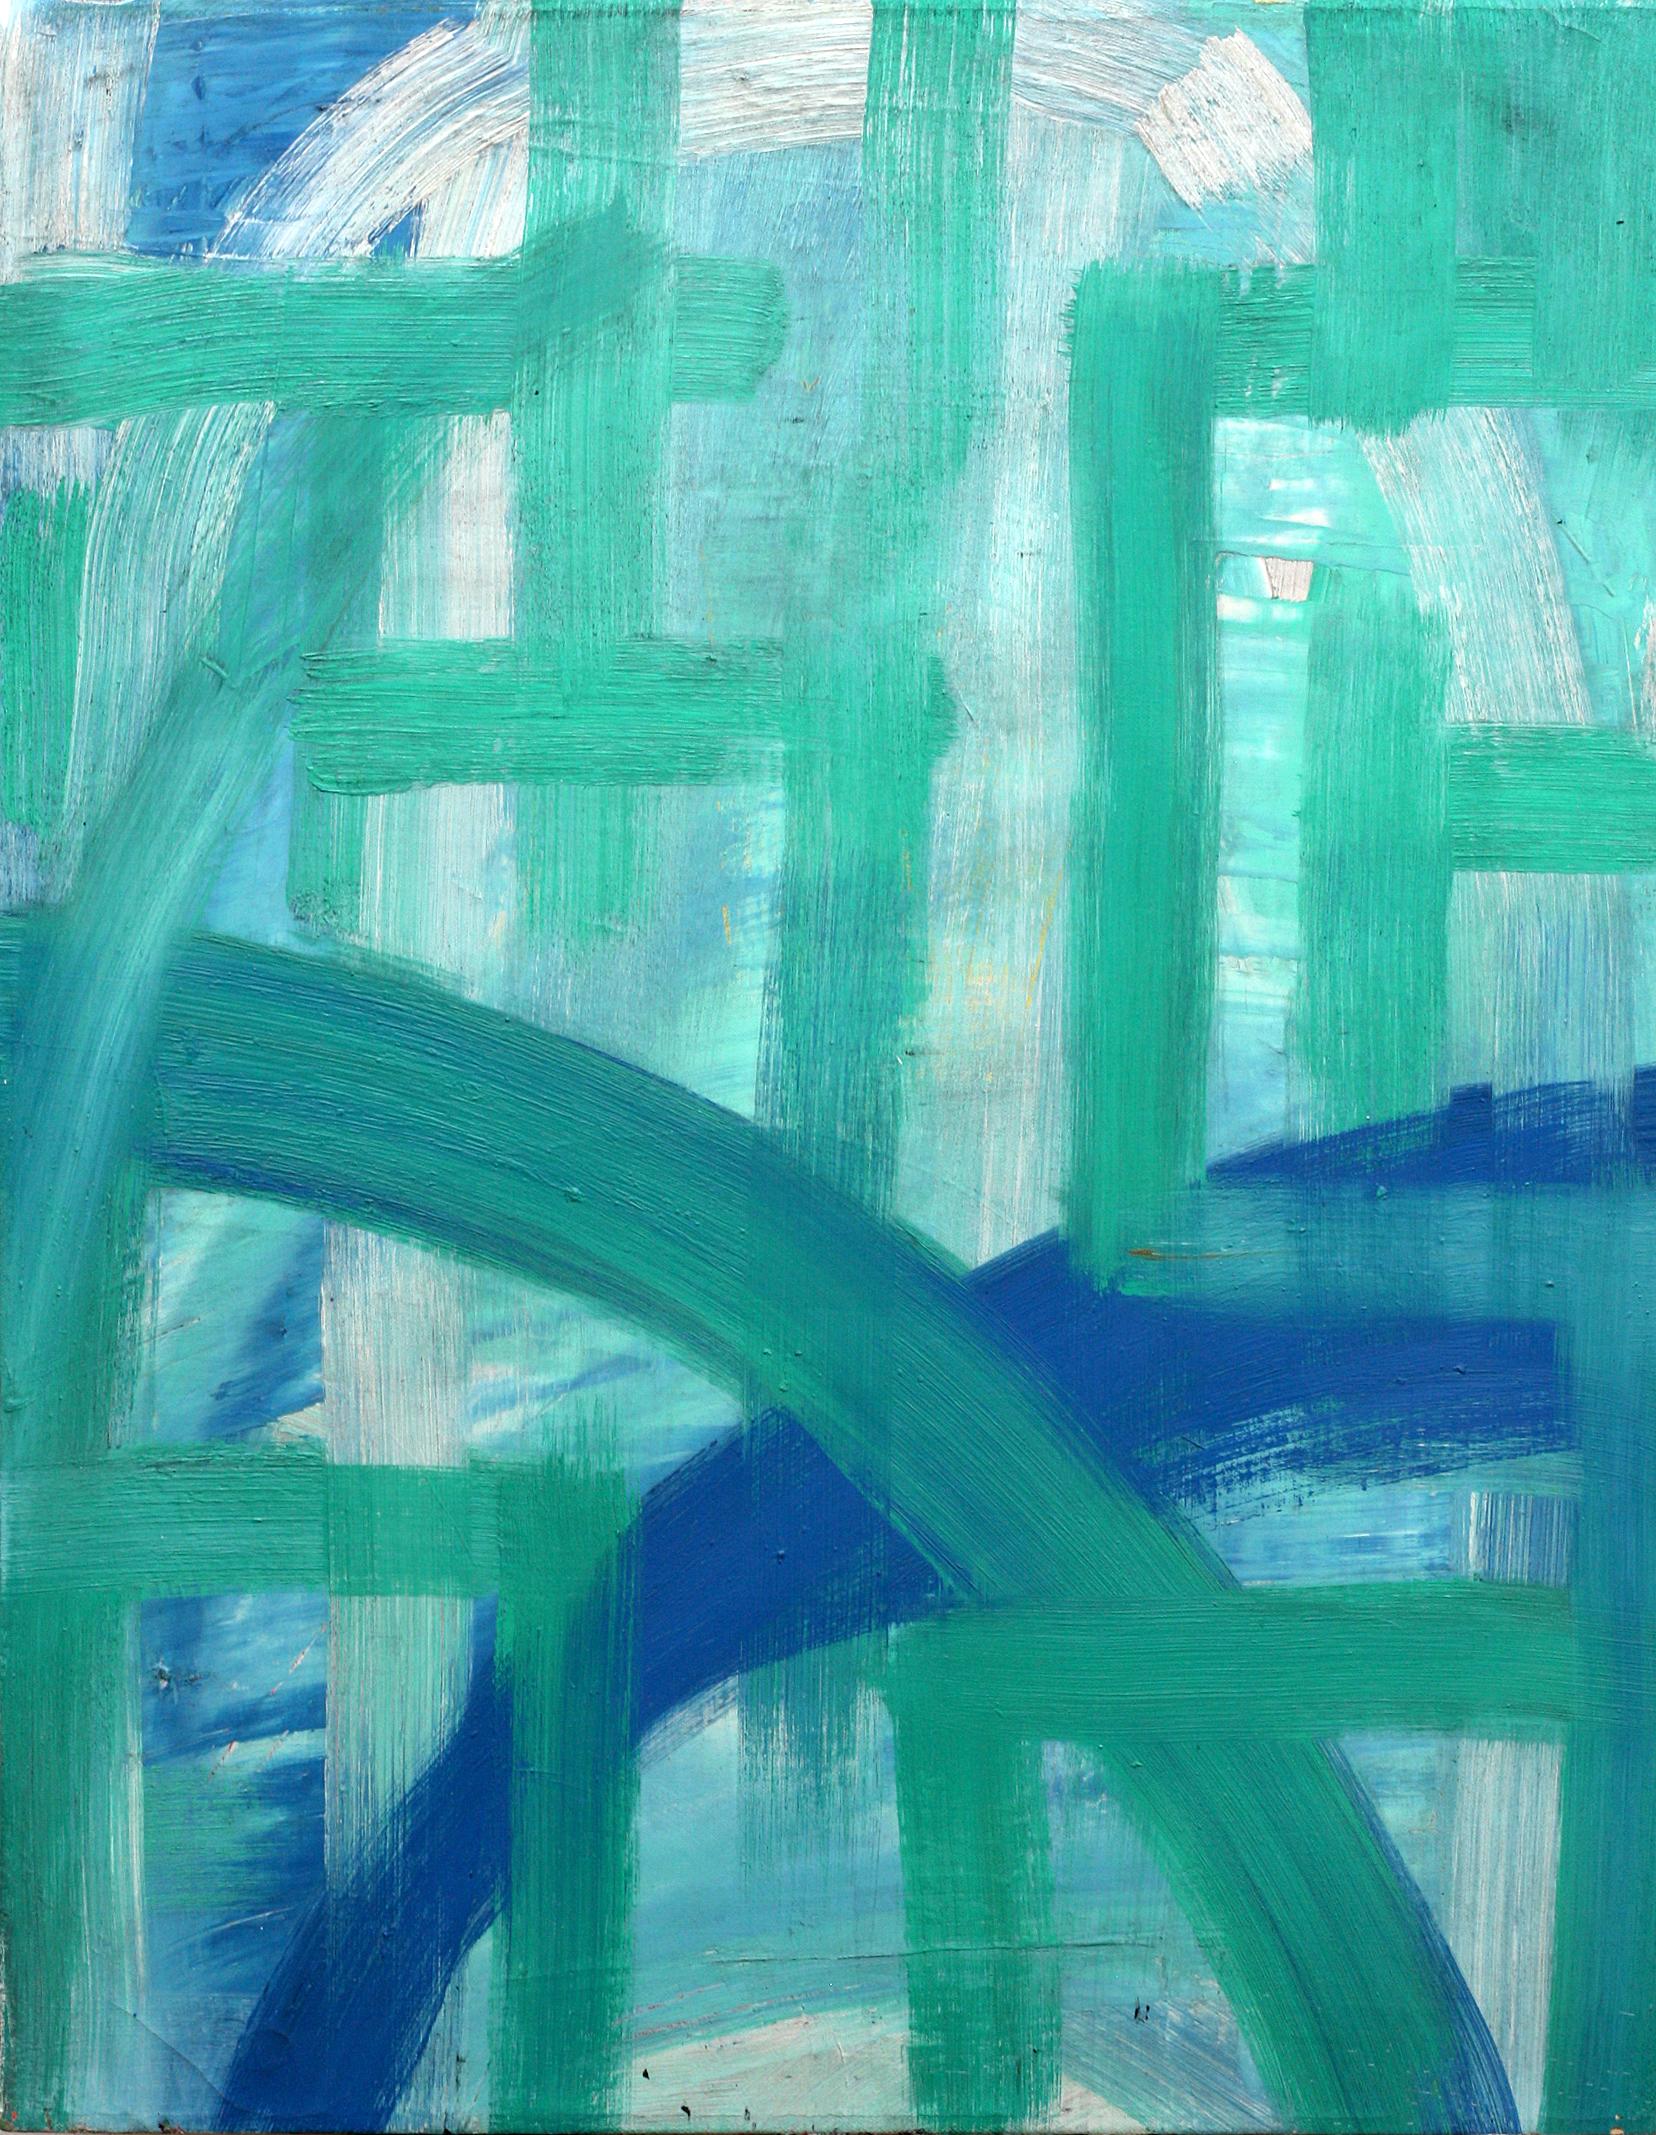 Harmonies in Blues & Greens (Bold Contemporary Abstract Expressionist Painting)